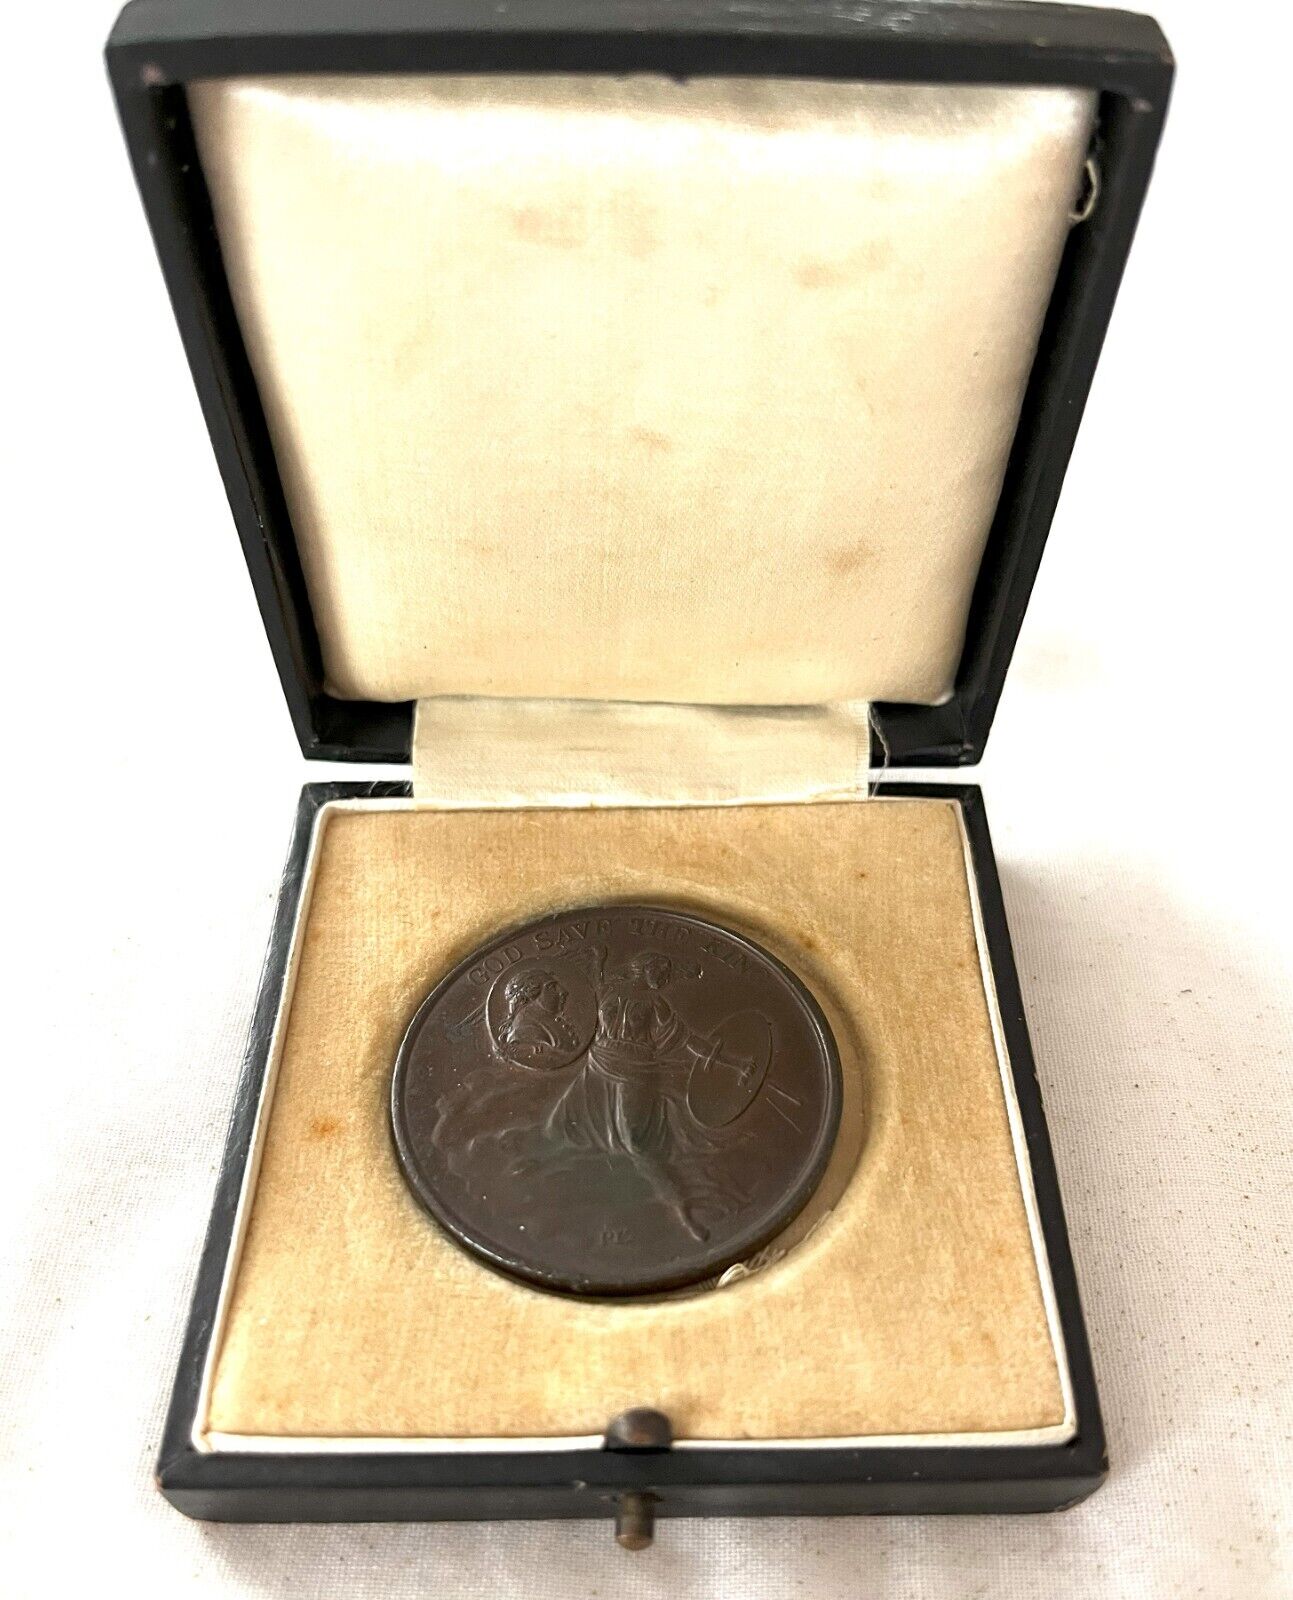 King George II Commemorative Medal - May 15, 1800 Assassination attempt